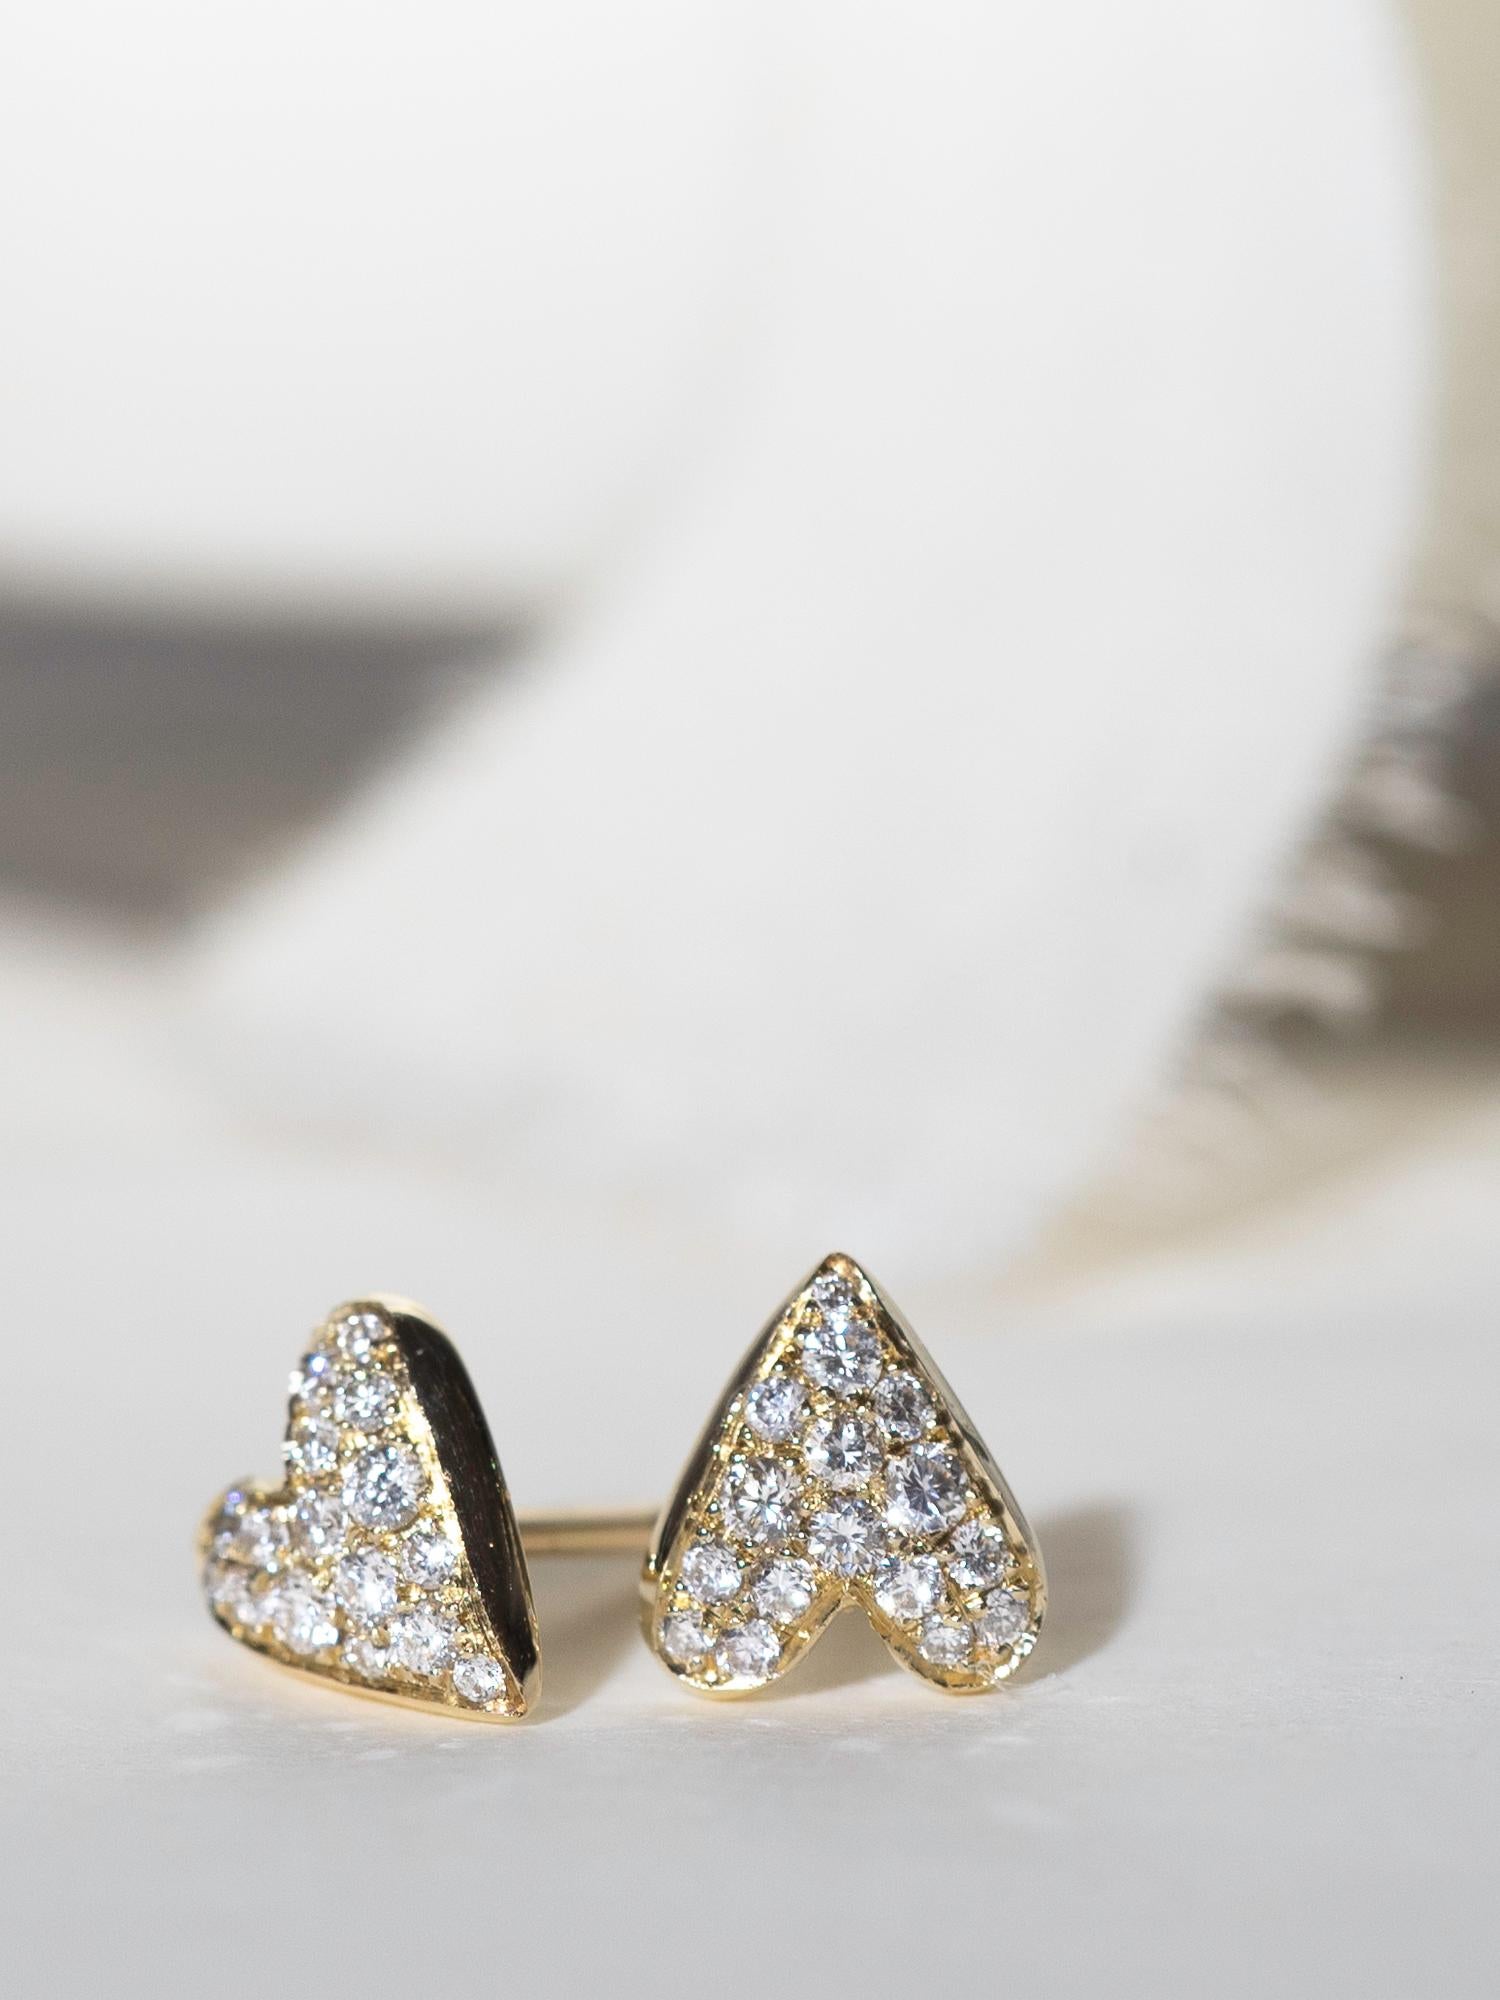 Hand-crafted in 14 karat yellow gold these stud earrings are shimmering perfection. Designed with a slightly domed surface for pavé diamonds to catch and reflect light at all angles, these little symbols of love are the perfect gift for yourself or